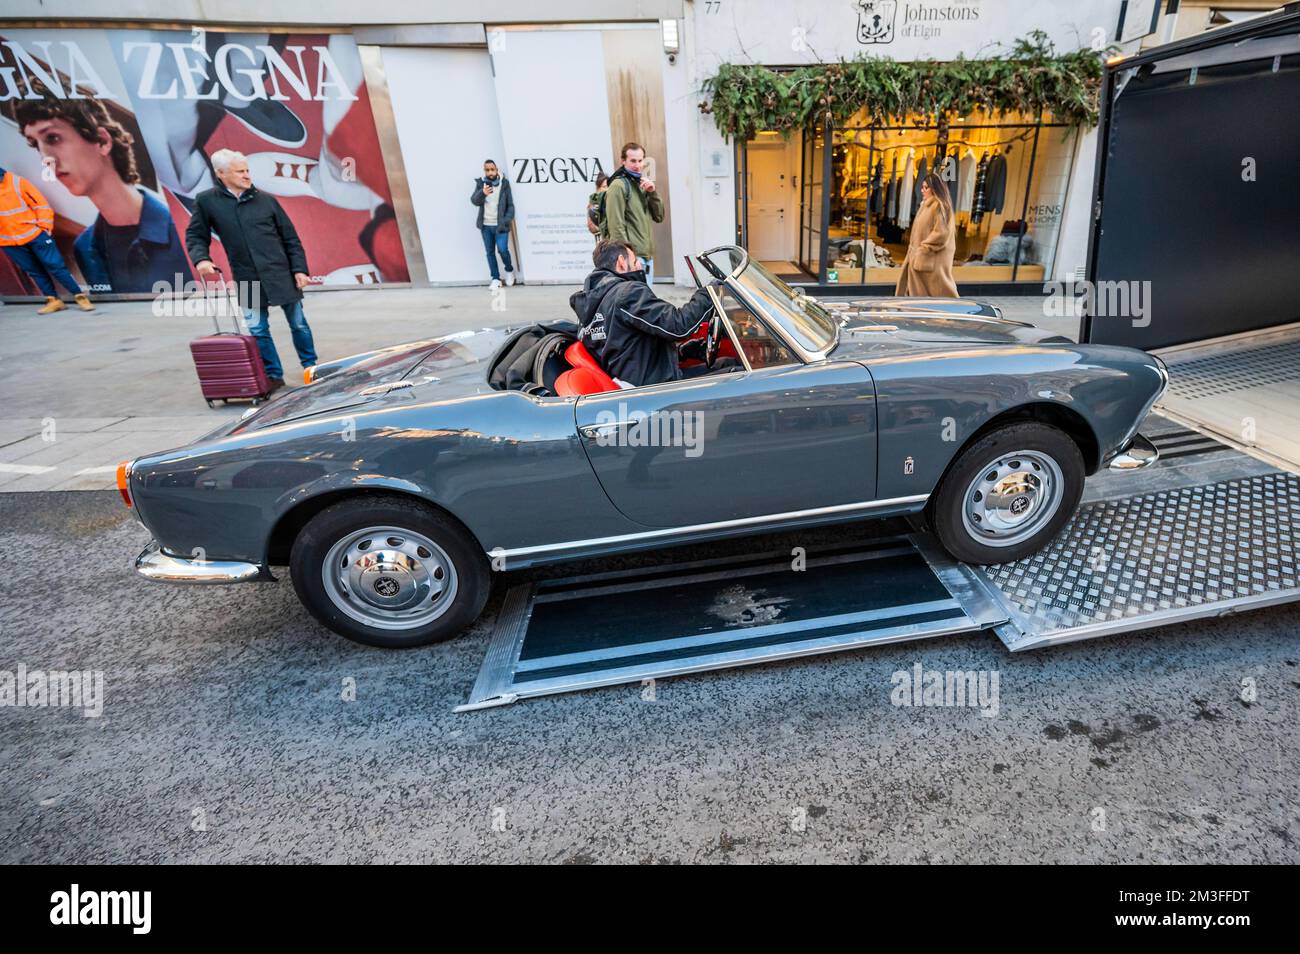 London, UK. 15th Dec, 2022. 1961 Alfa Romeo Giulietta Spider, est £50,000 - £70,000 - A preview of the Street Collector Cars sale at Bonhams New Bond Street. The Sal takes place on 16 Dec 2022. Credit: Guy Bell/Alamy Live News Stock Photo